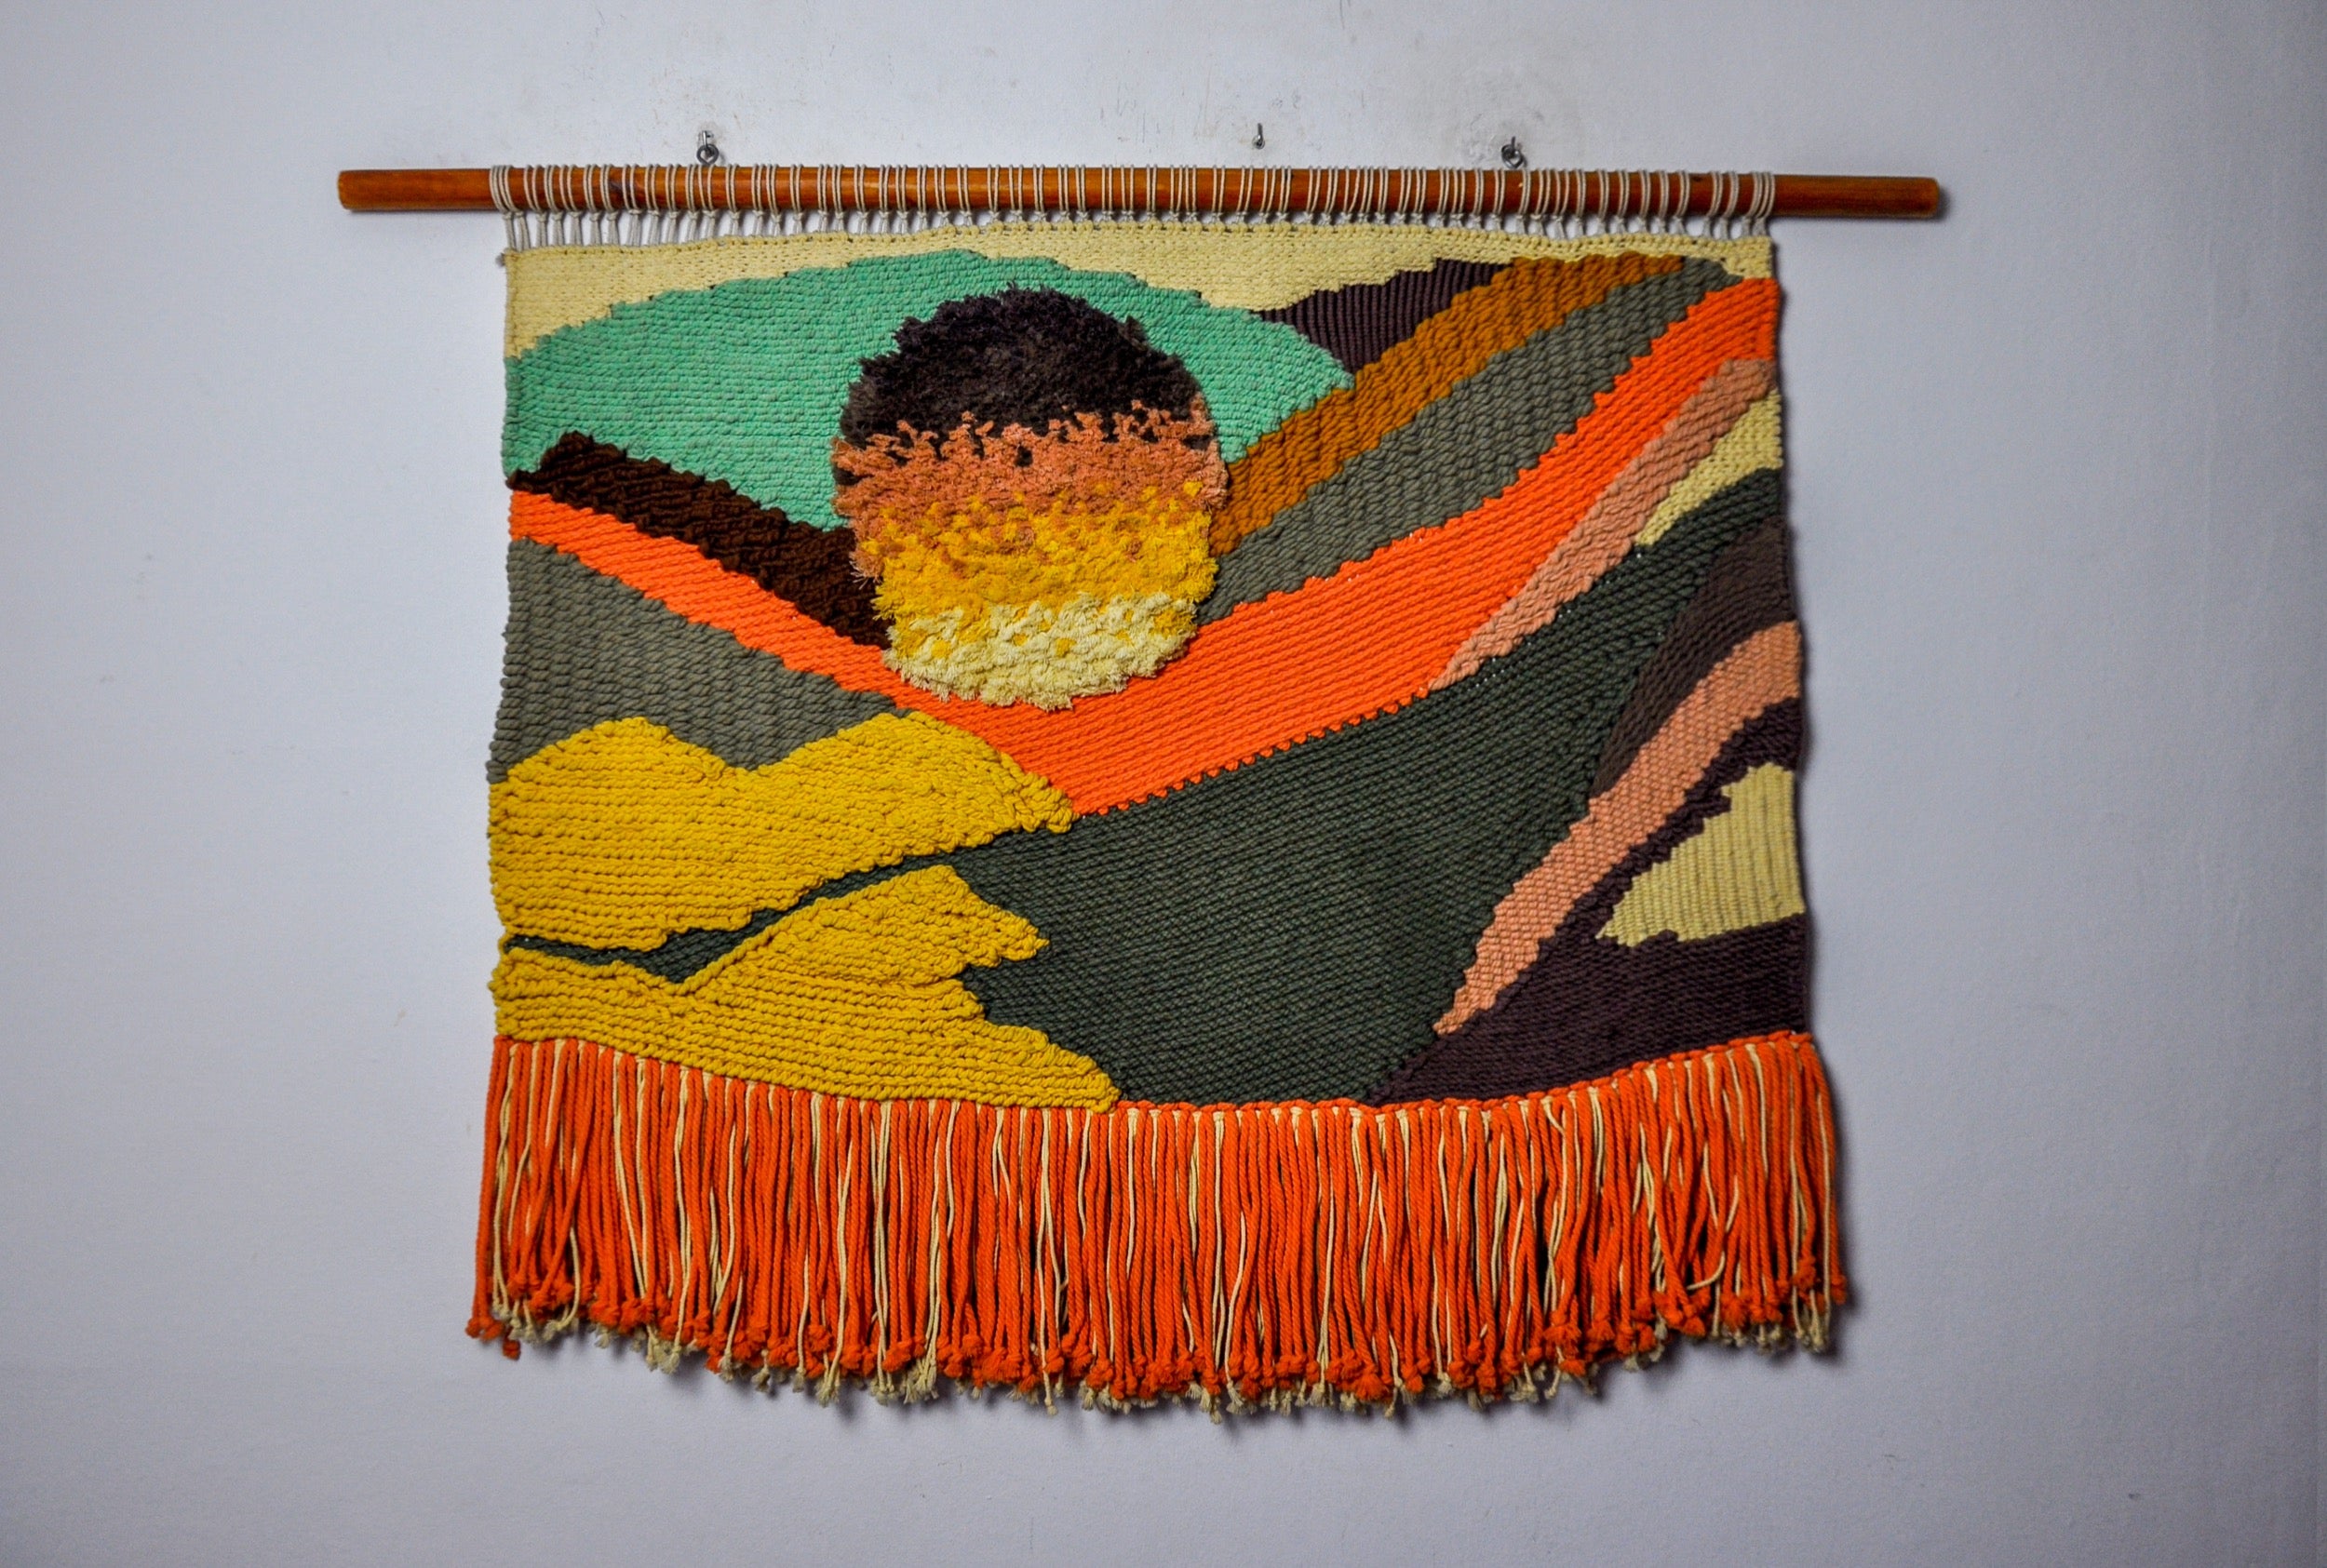 Superb macramé wall tapestry, spain, 1970s.

Large format.

Handcrafted tapestry composed of different textures and materials creating unique patterns and reliefs representing a sunset in the catalan country.

All ropes and wires were made and